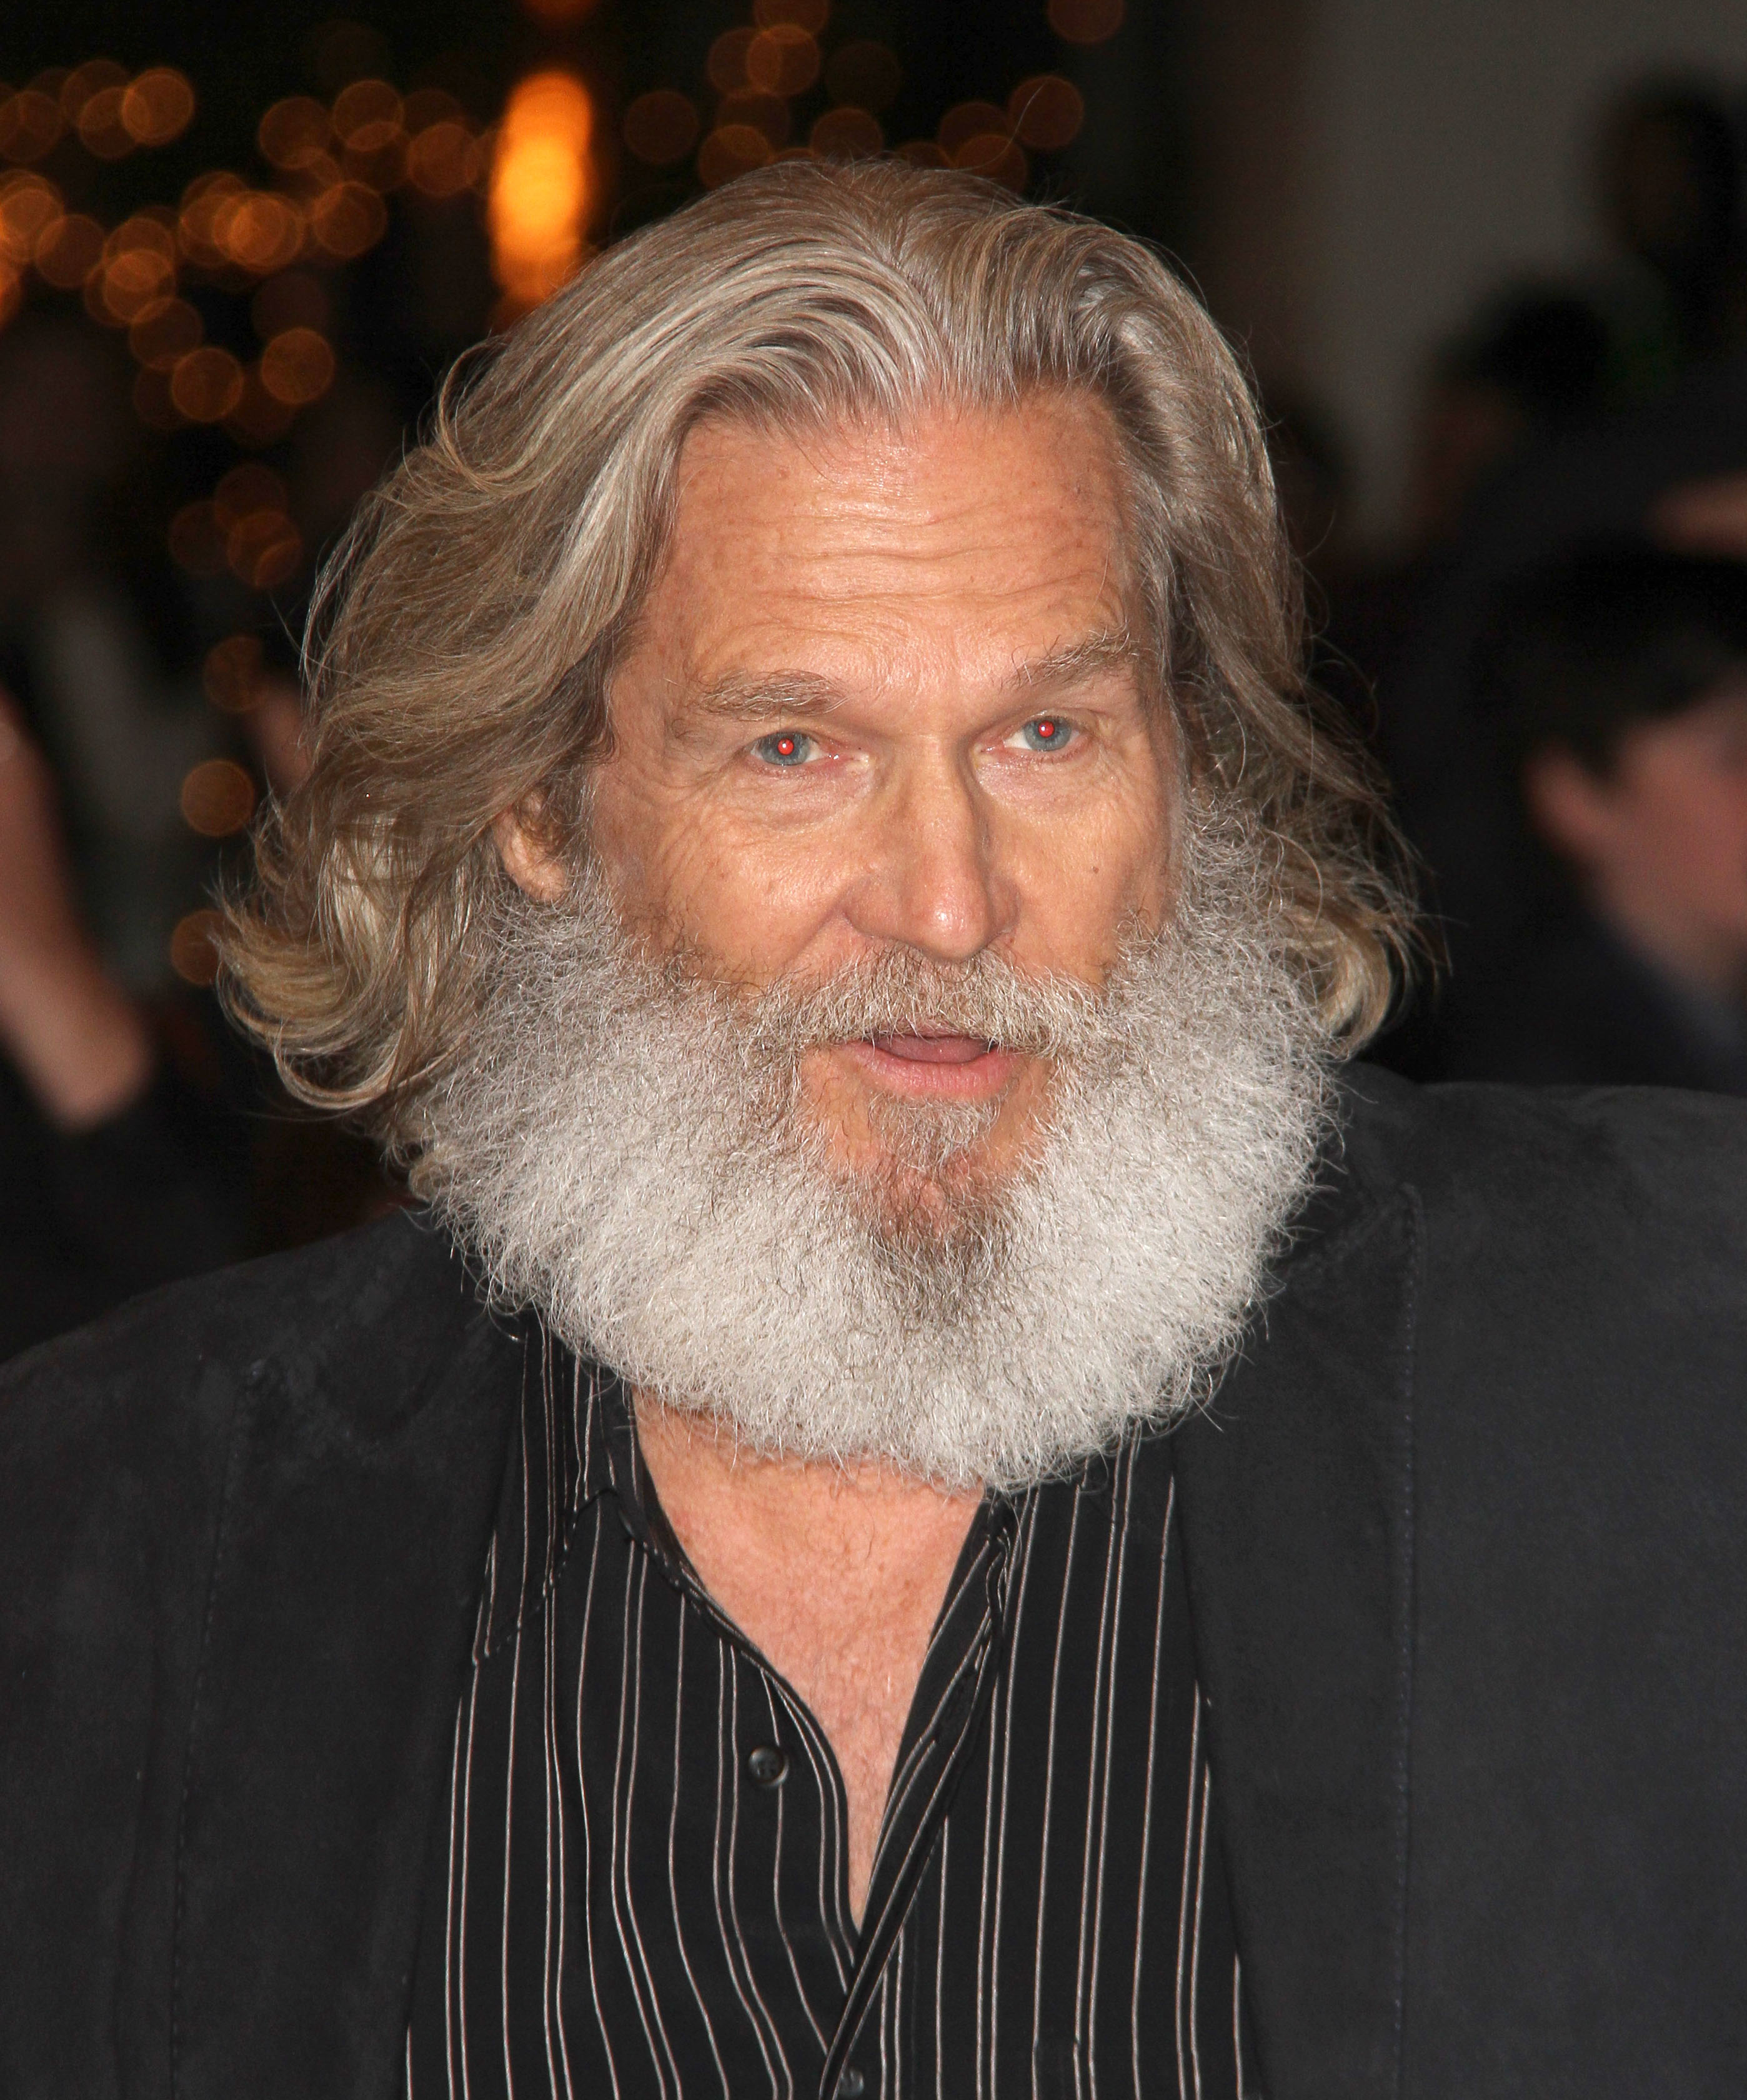 Pictured Jeff Bridges  You Better Believe Hollywoods Sexiest Men Came  Out in Full Force at the Oscars  POPSUGAR Celebrity Photo 32